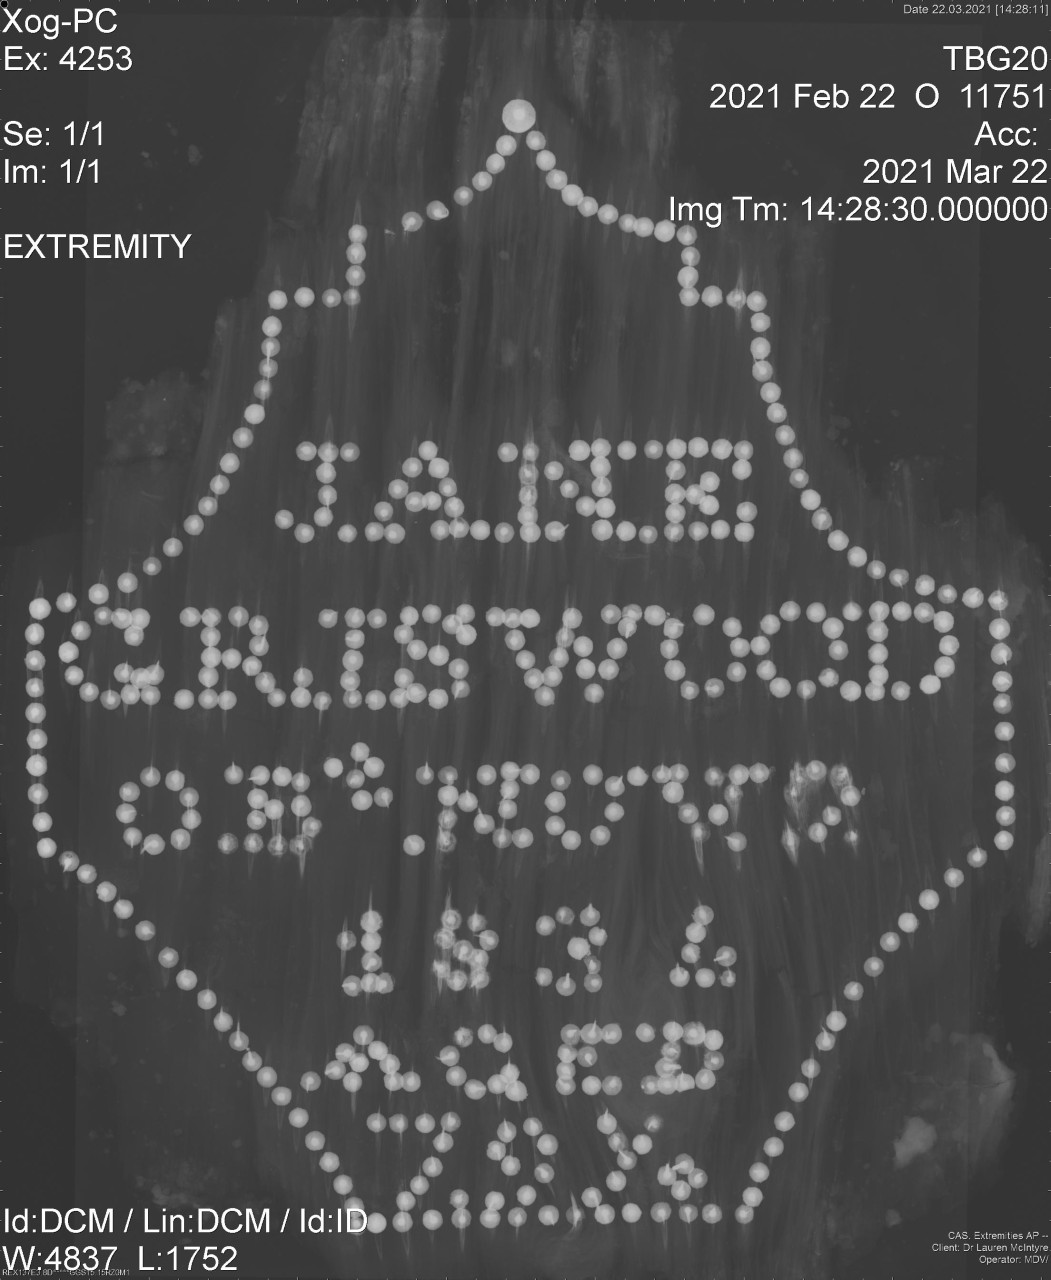 X-ray of the studded coffin lid of Jane Griswood